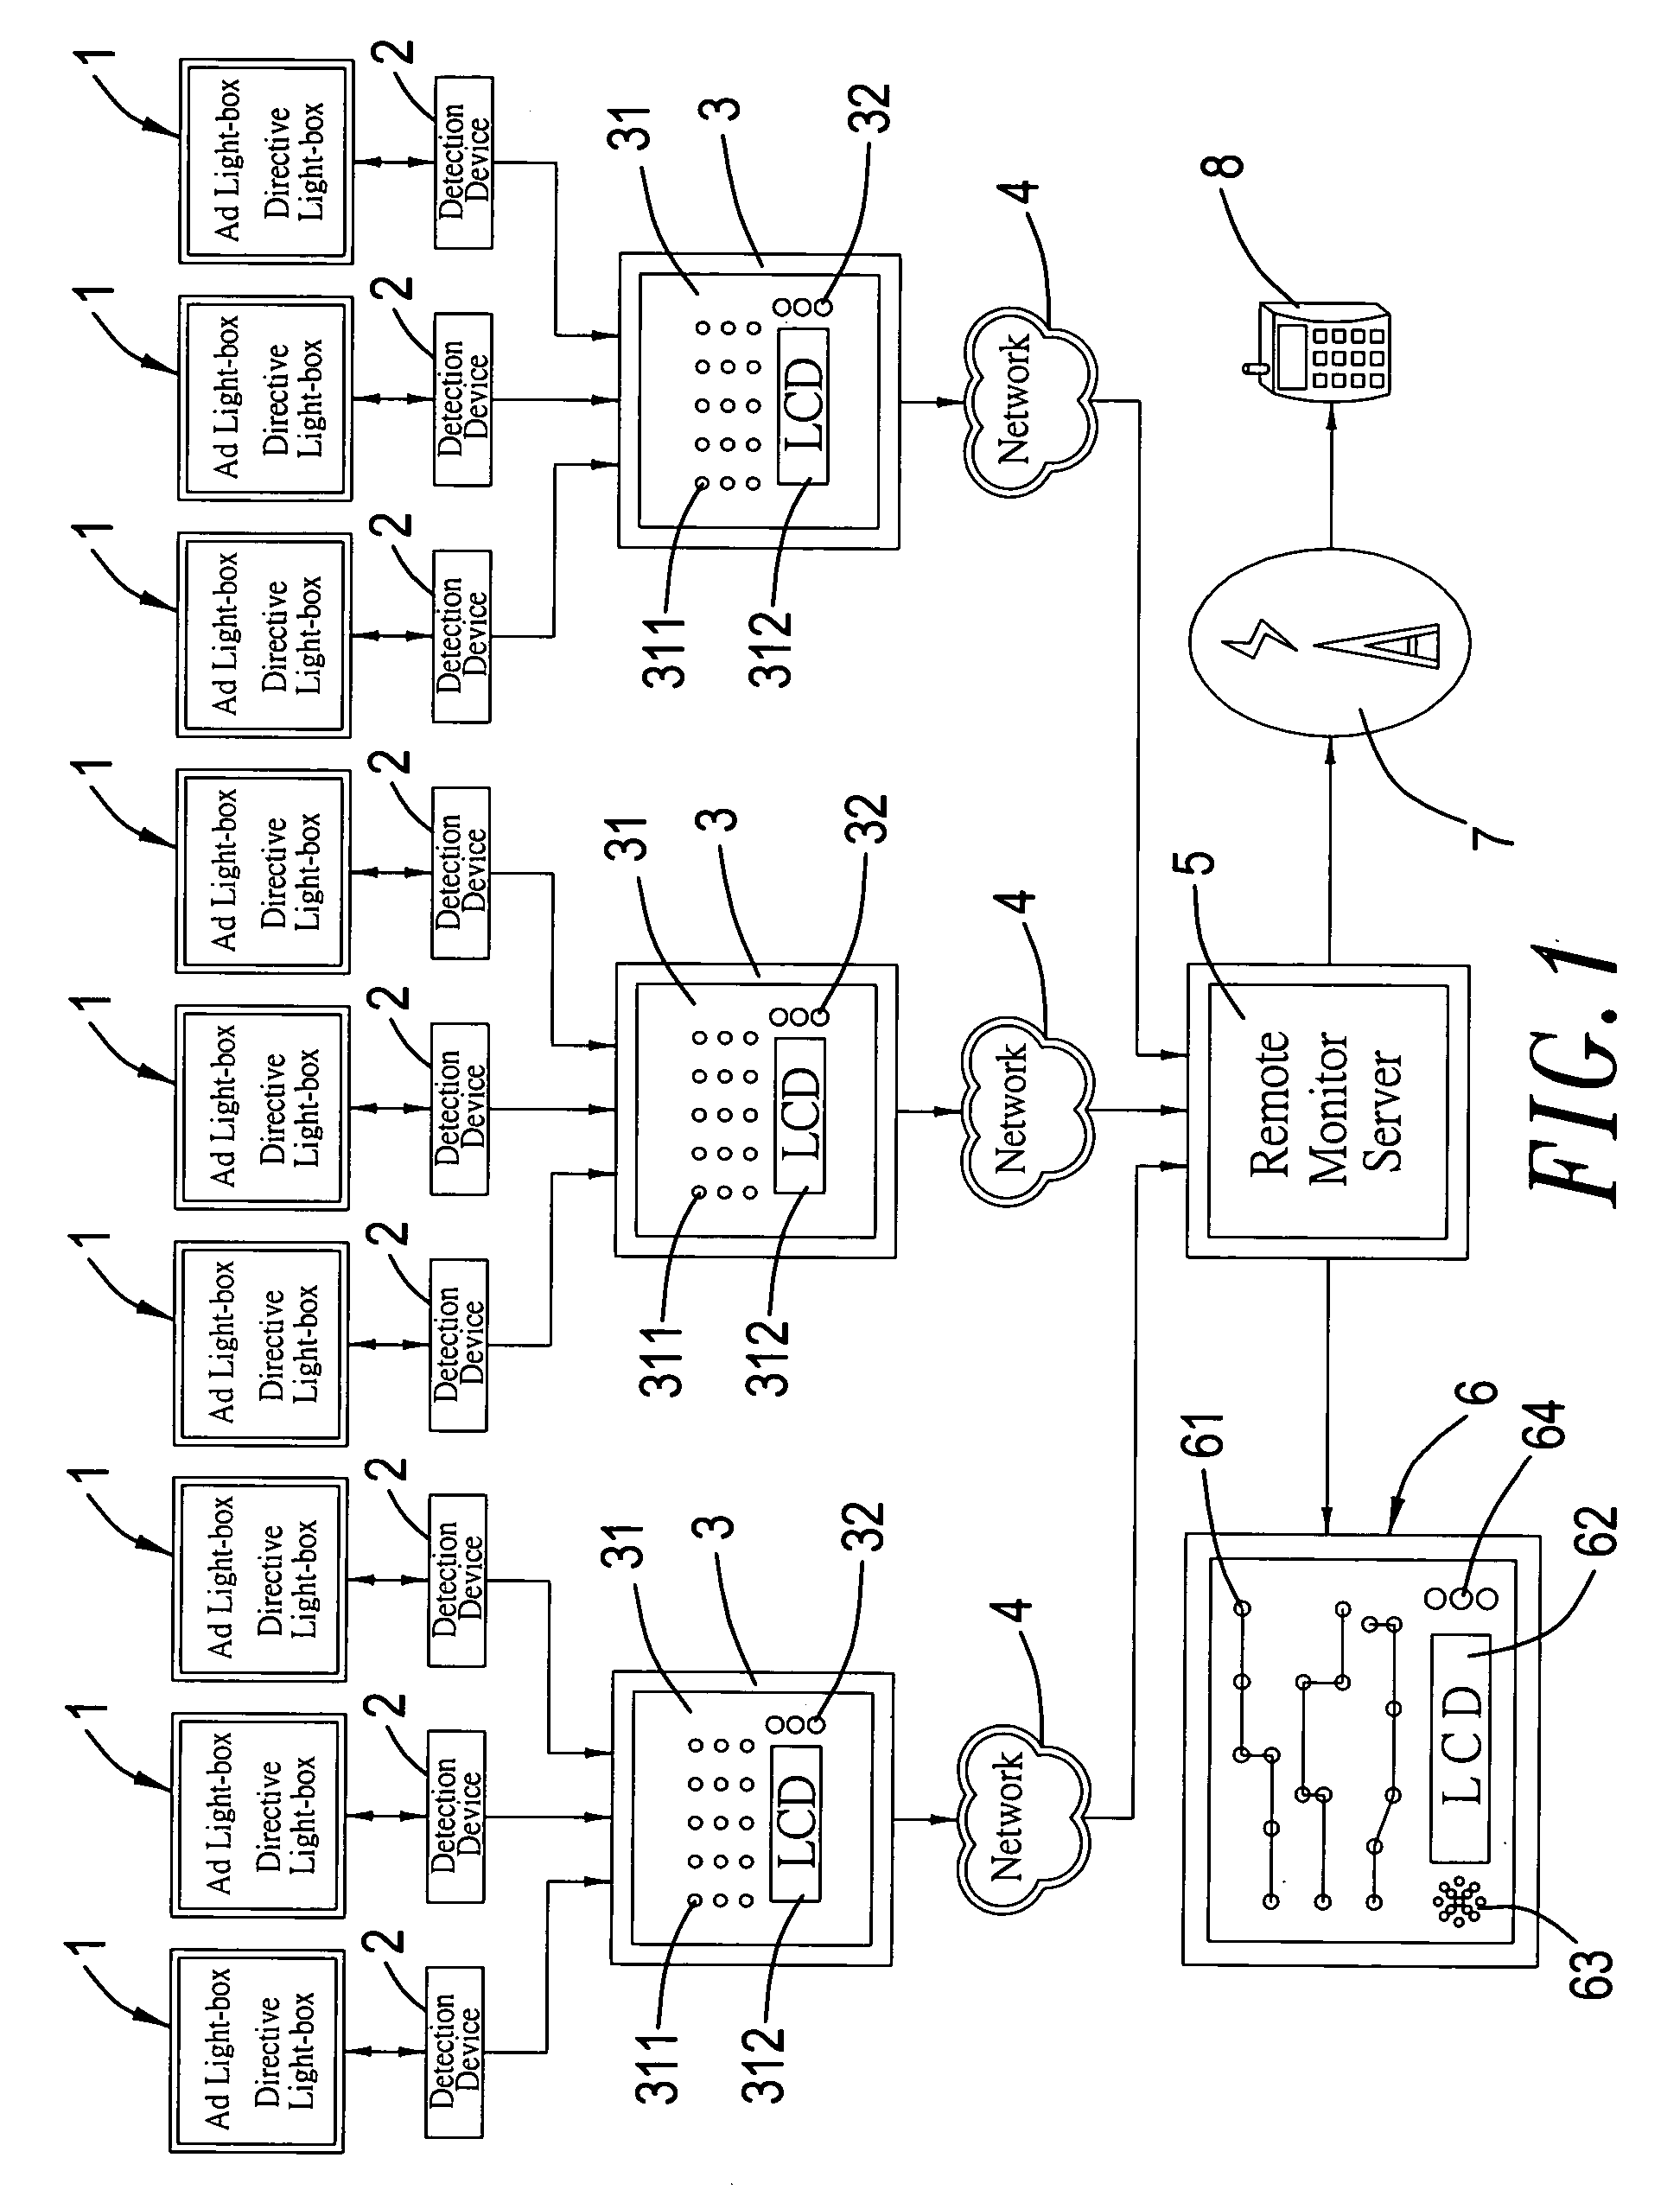 Advertising light-box network system with auto-detection and auto-monitor